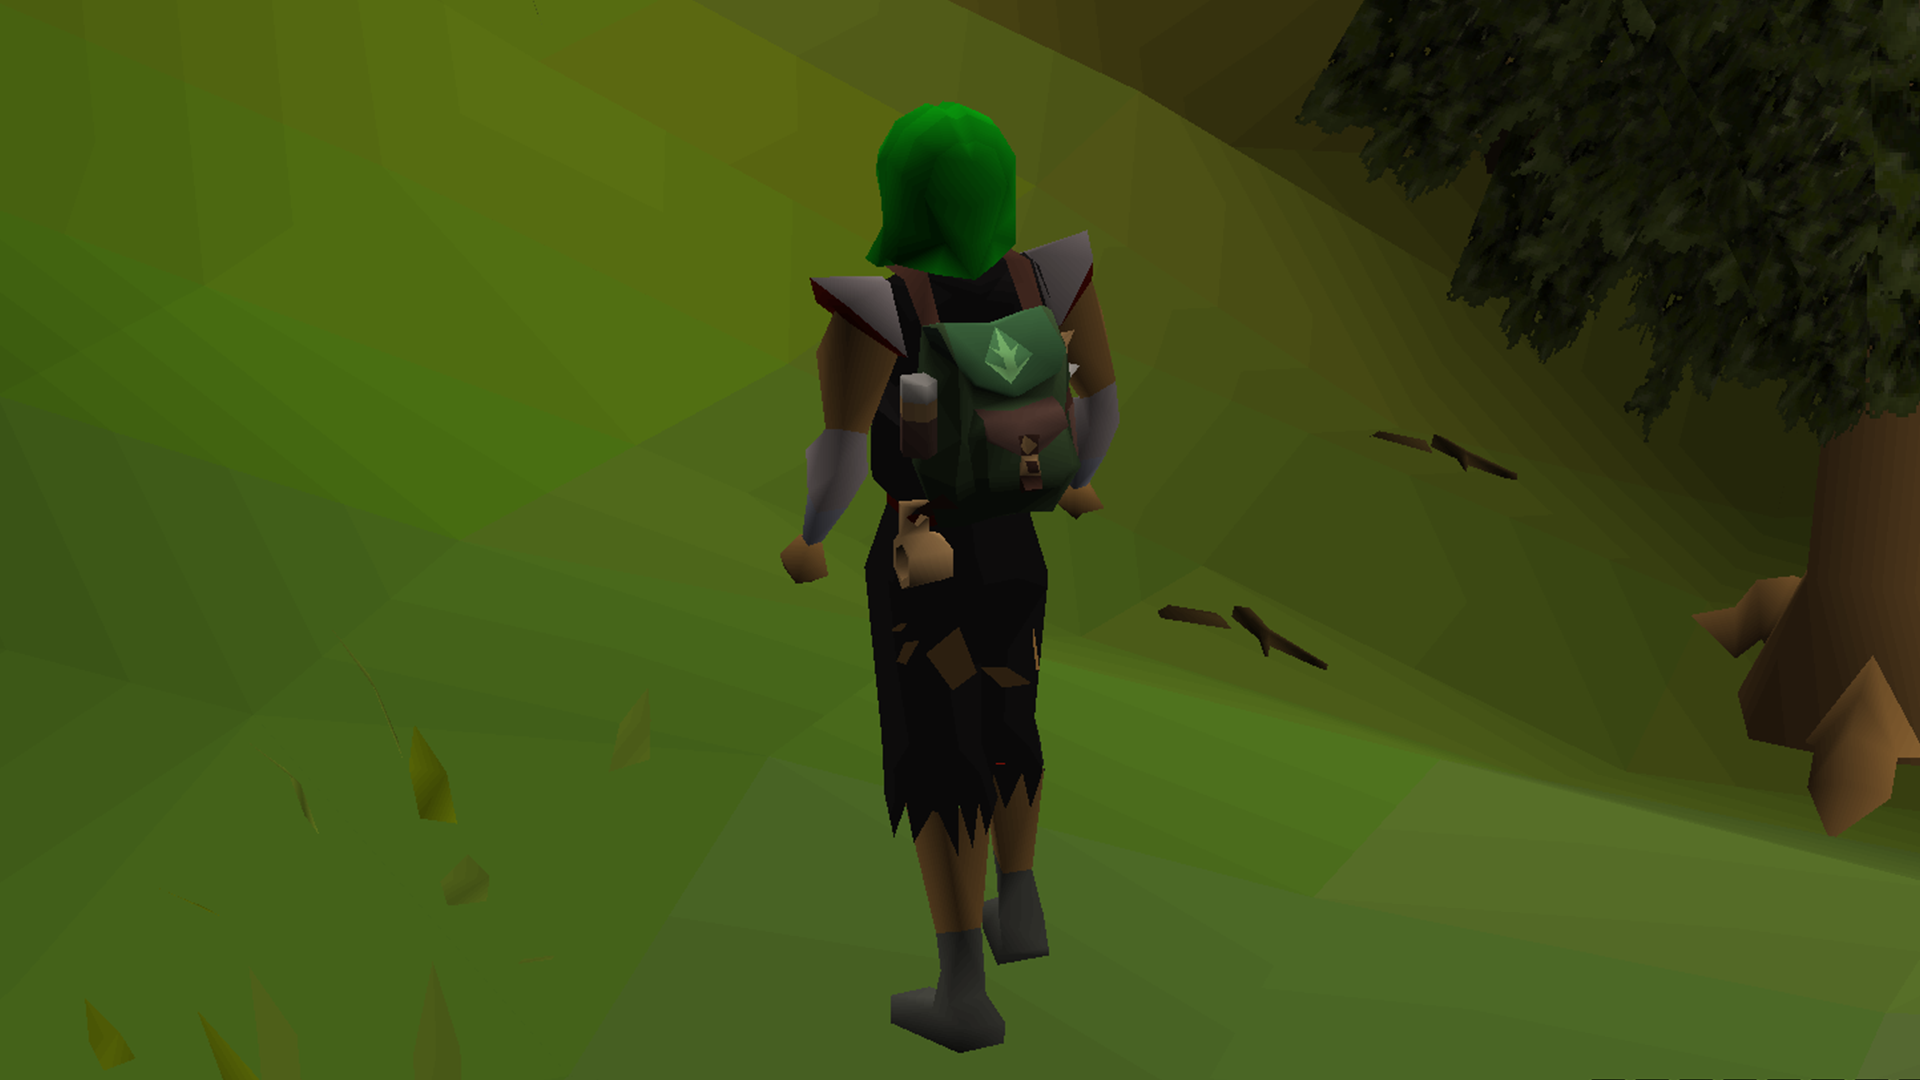 Old School RuneScape Forestry: Way of the Forester details